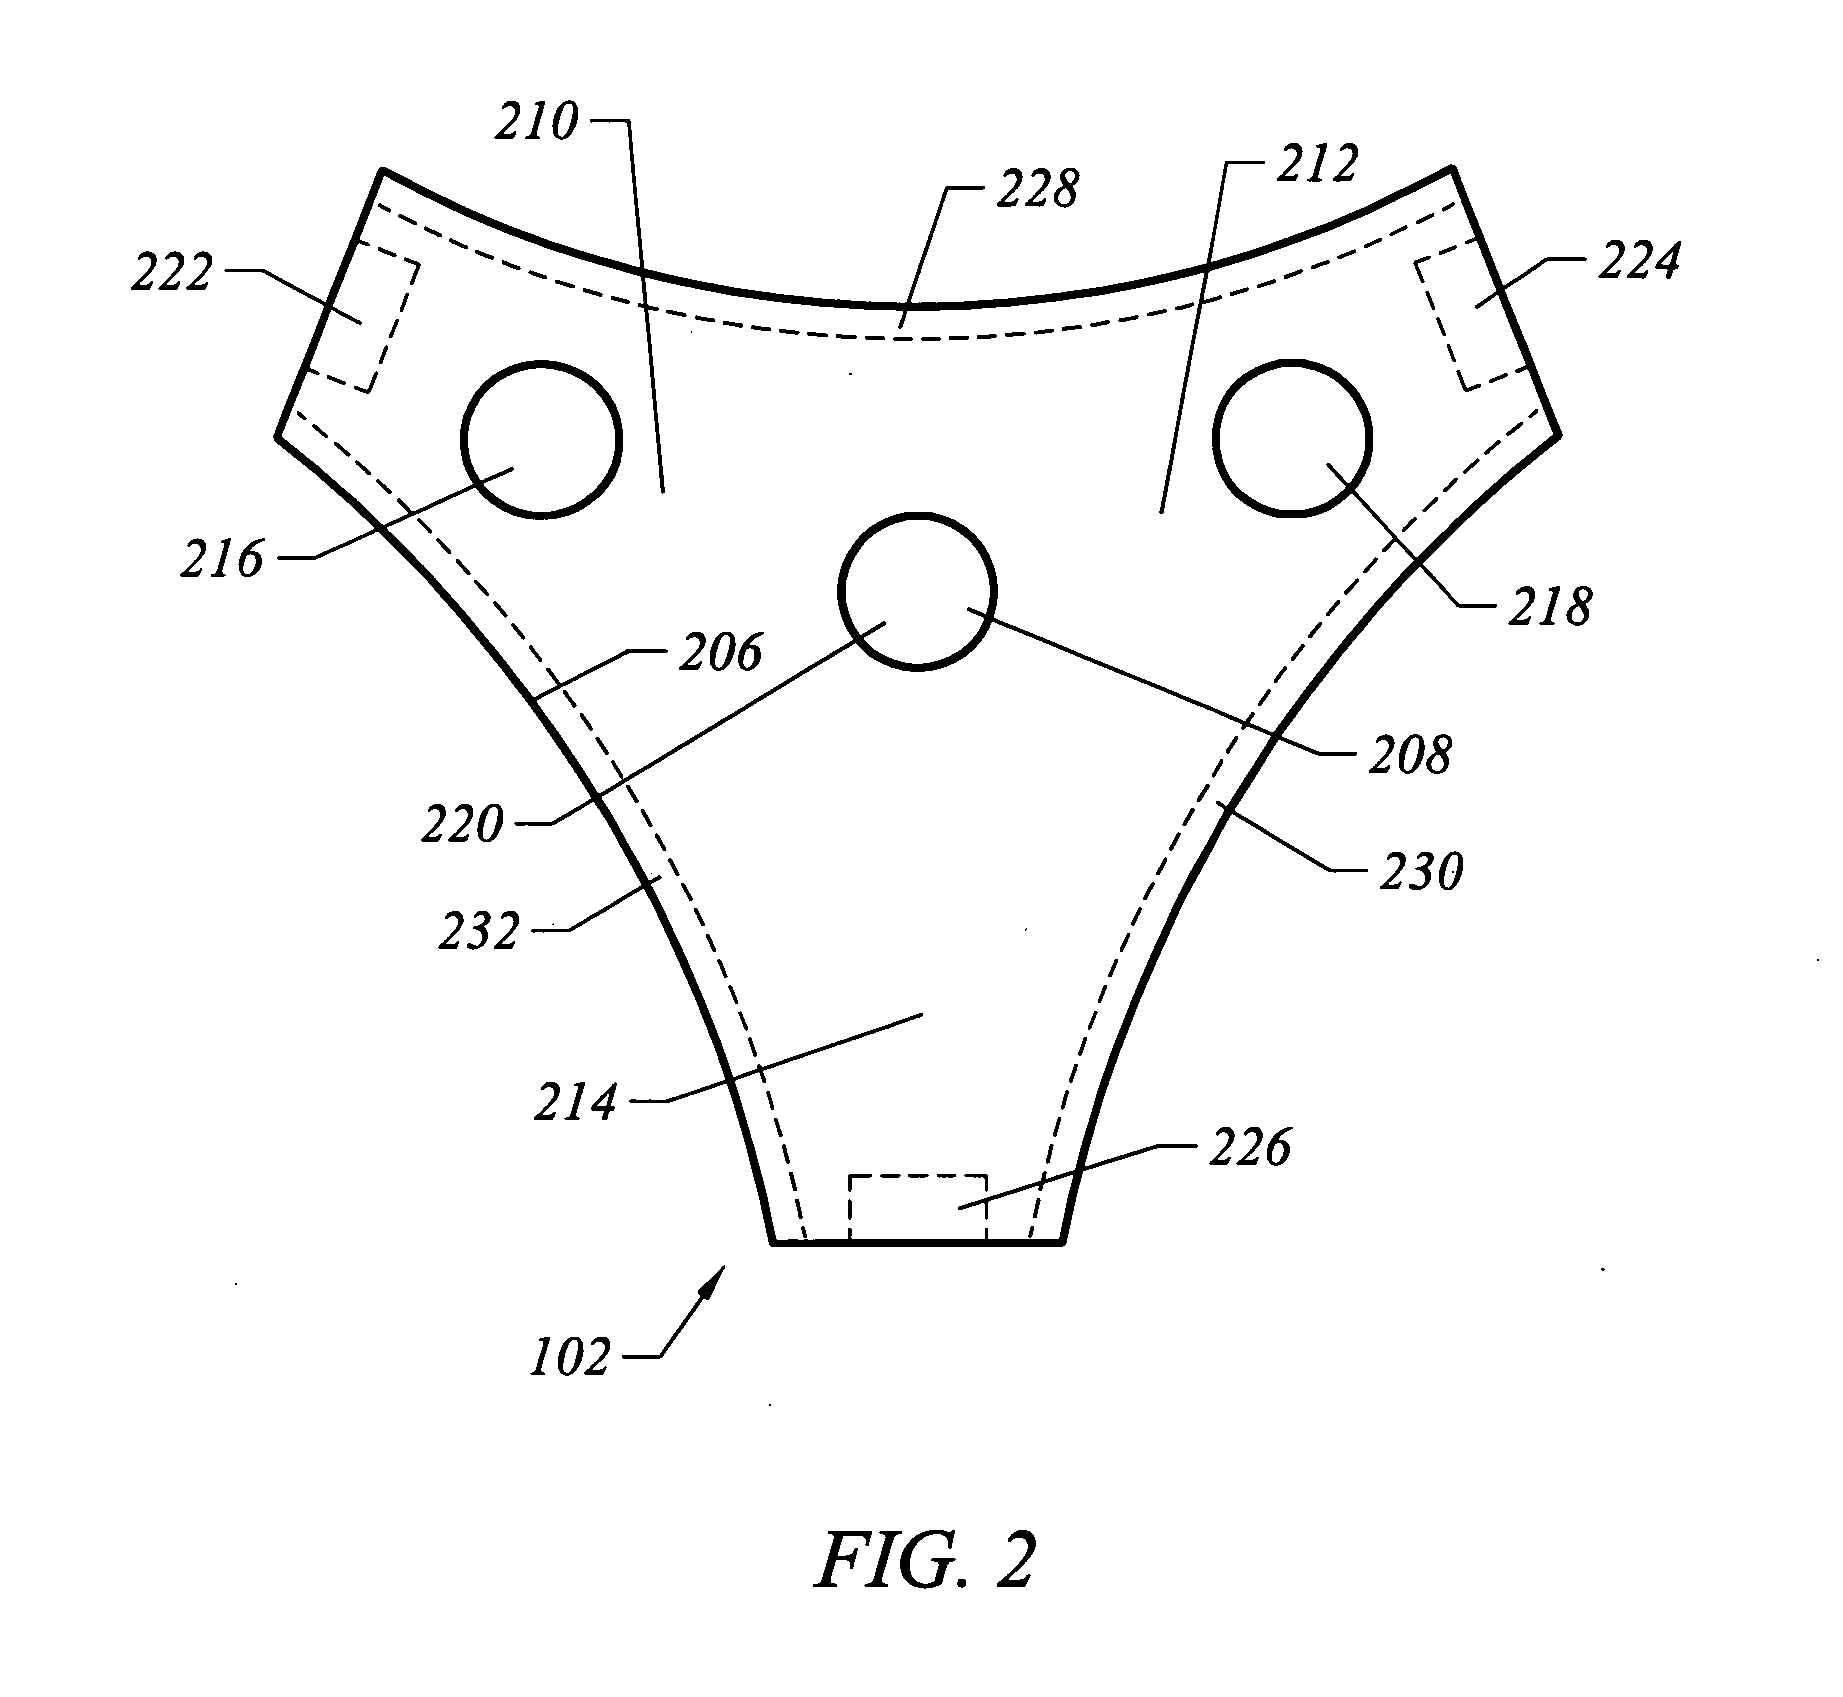 Apparatus and method for electrically and mechanically connecting and disconnecting a power line